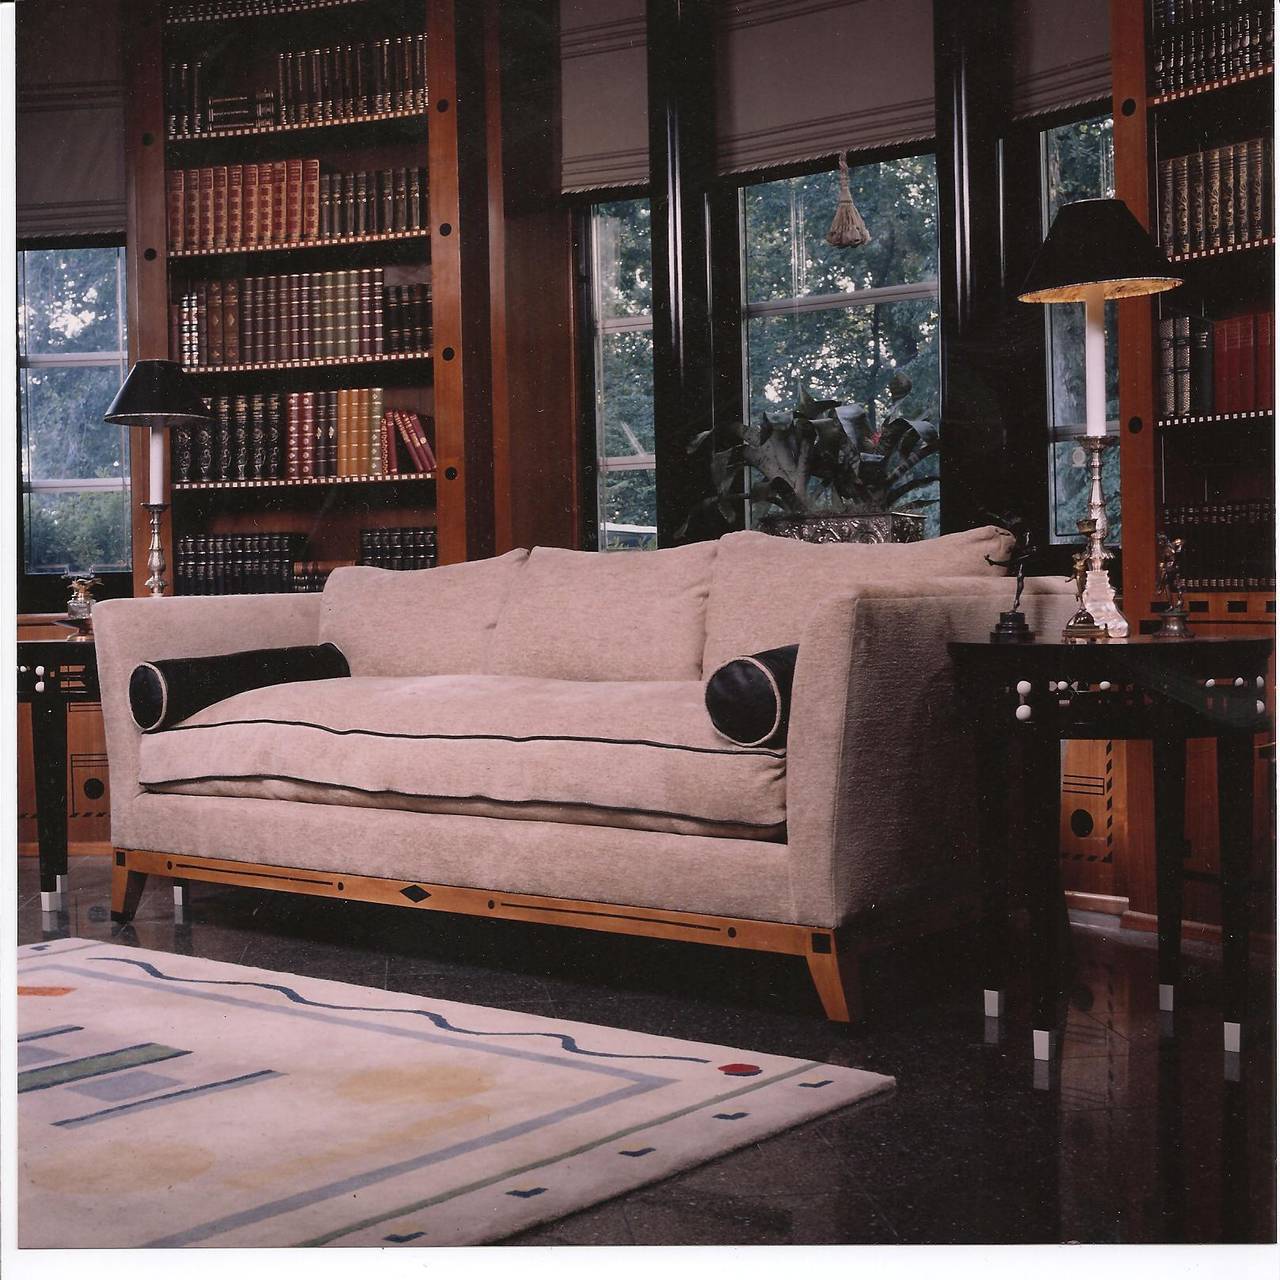 A superbly designed 1980’s Contemporary Sofa upholstered in a Donghia chenille linen, black leather welt trim on a single down and feather seat cushion and three down and feather back cushions. The Maple Wood Frame and Legs bearing a Black Stenciled